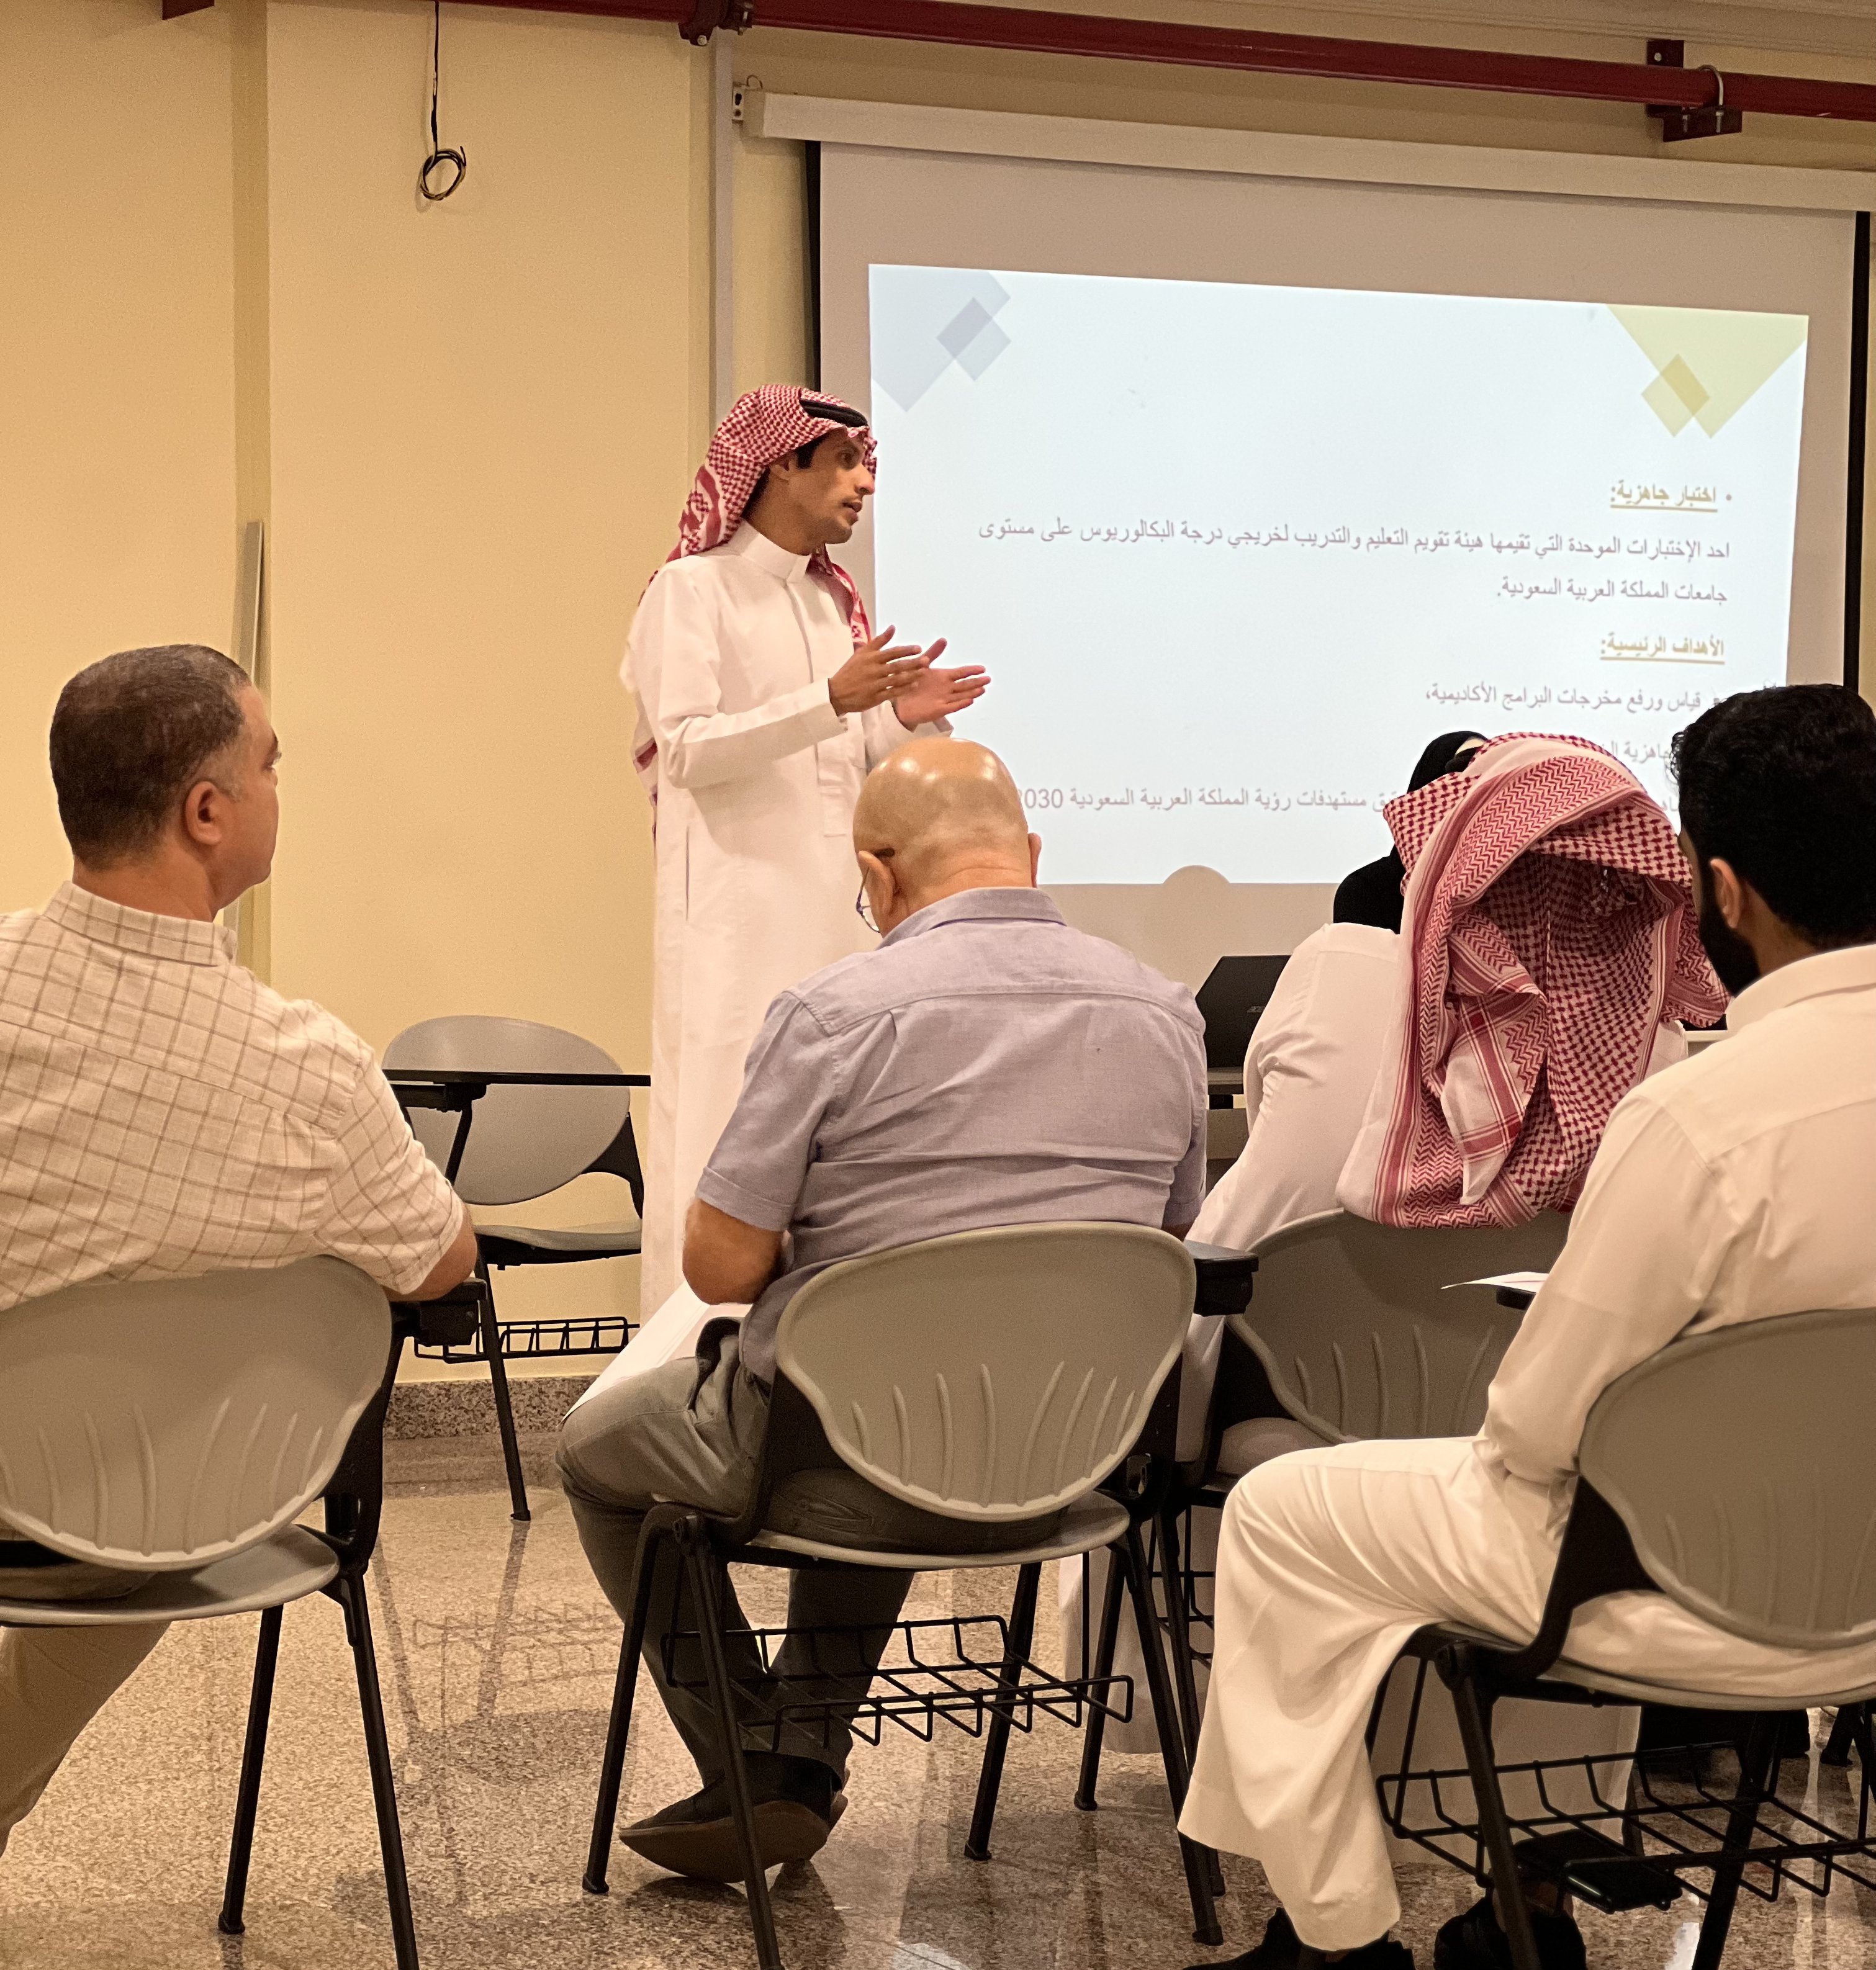 The College of Business Administration organized an introductory session on Standardized Tests